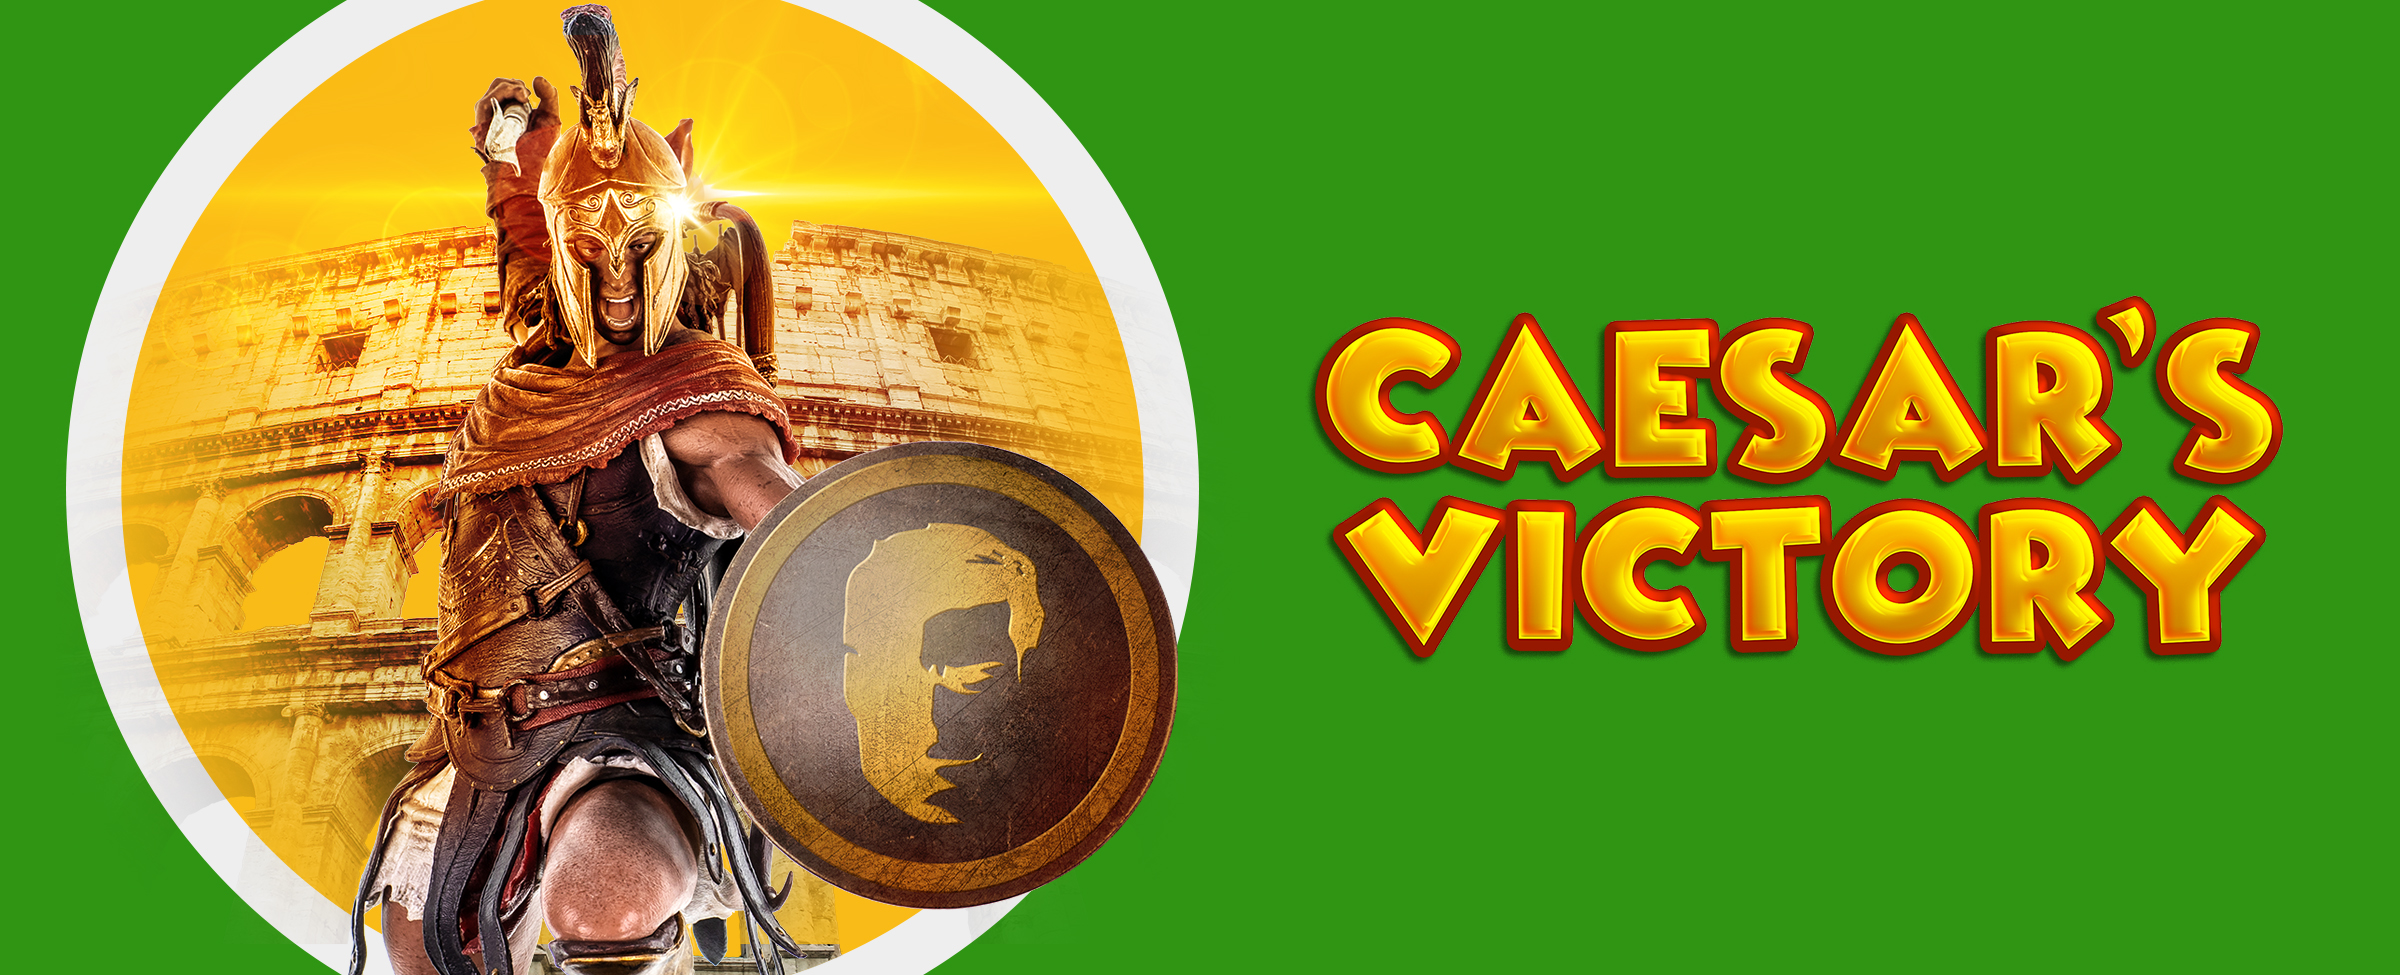 When in Rome... well, you know the rest. Let's take a journey through time in this review of Caesar's Victory – one of the best games in my line-up. You'll see.